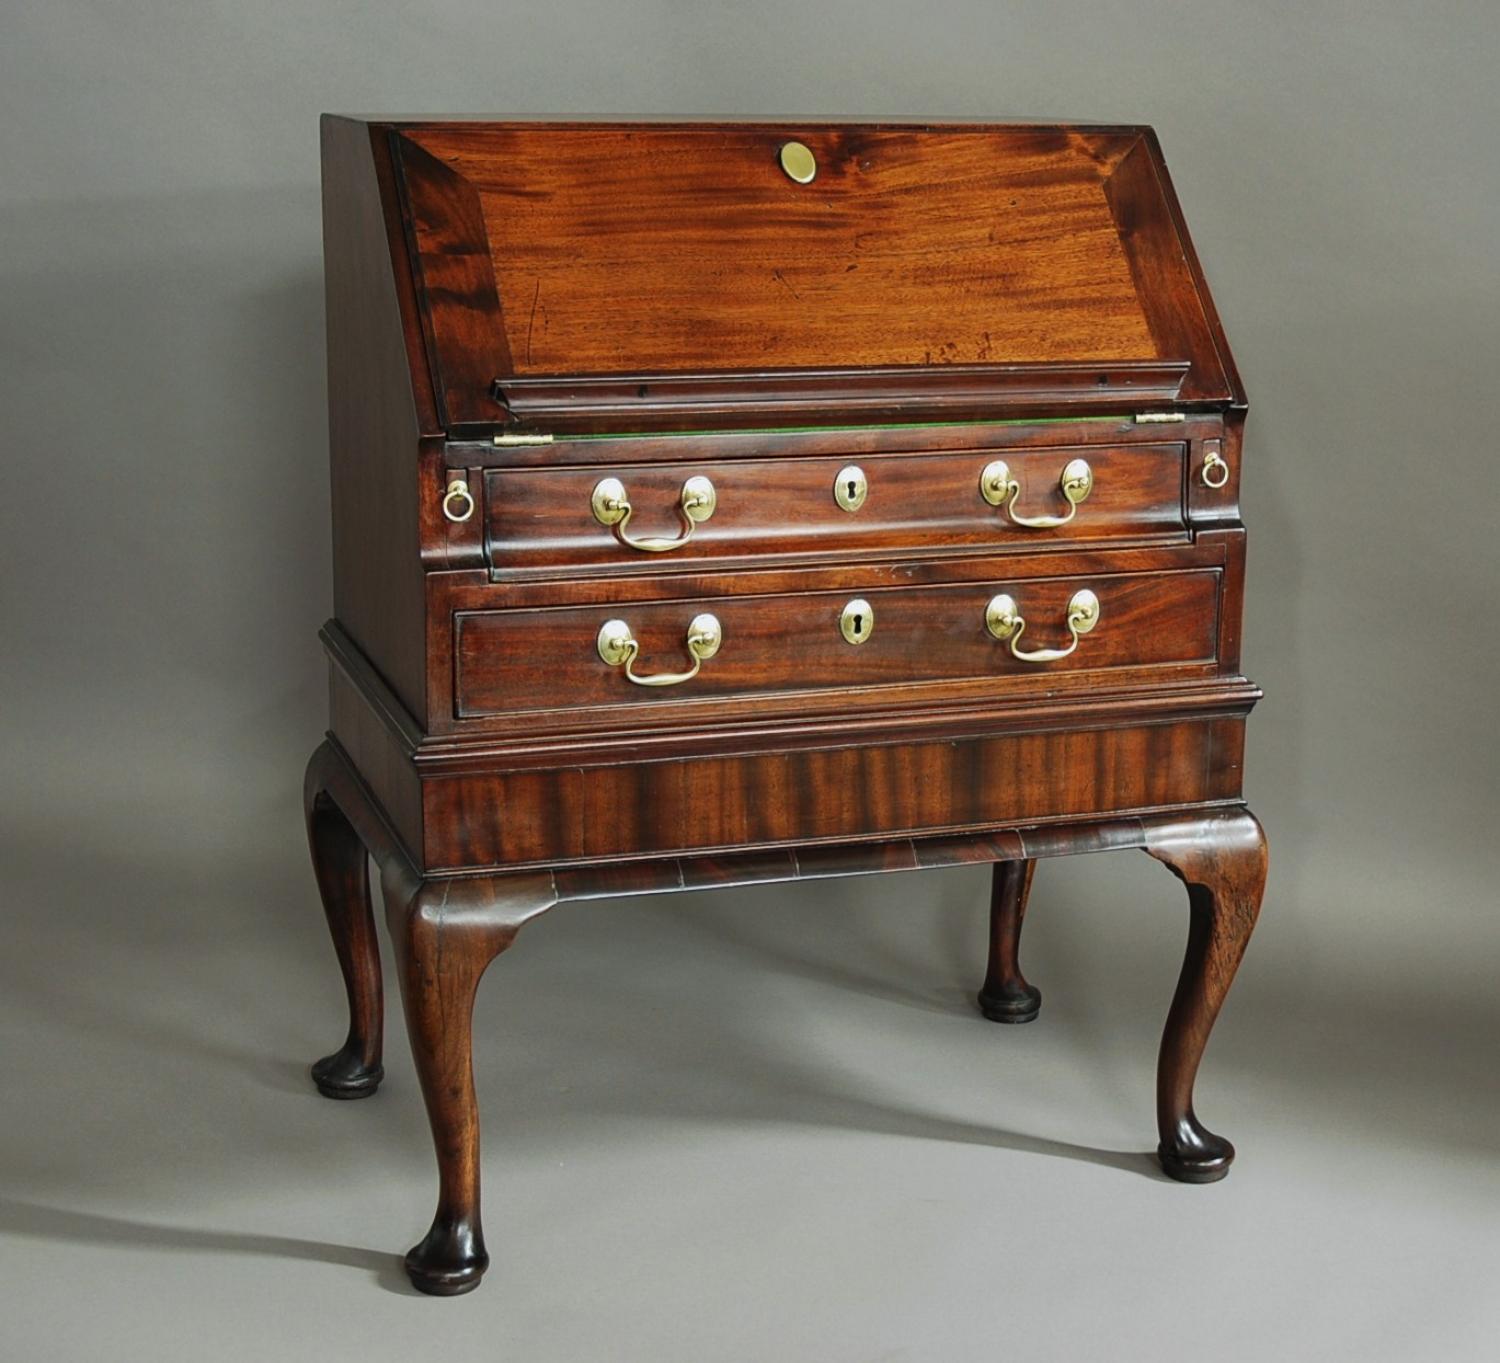 Elegant mid 18th century mahogany bureau on stand of small proportions